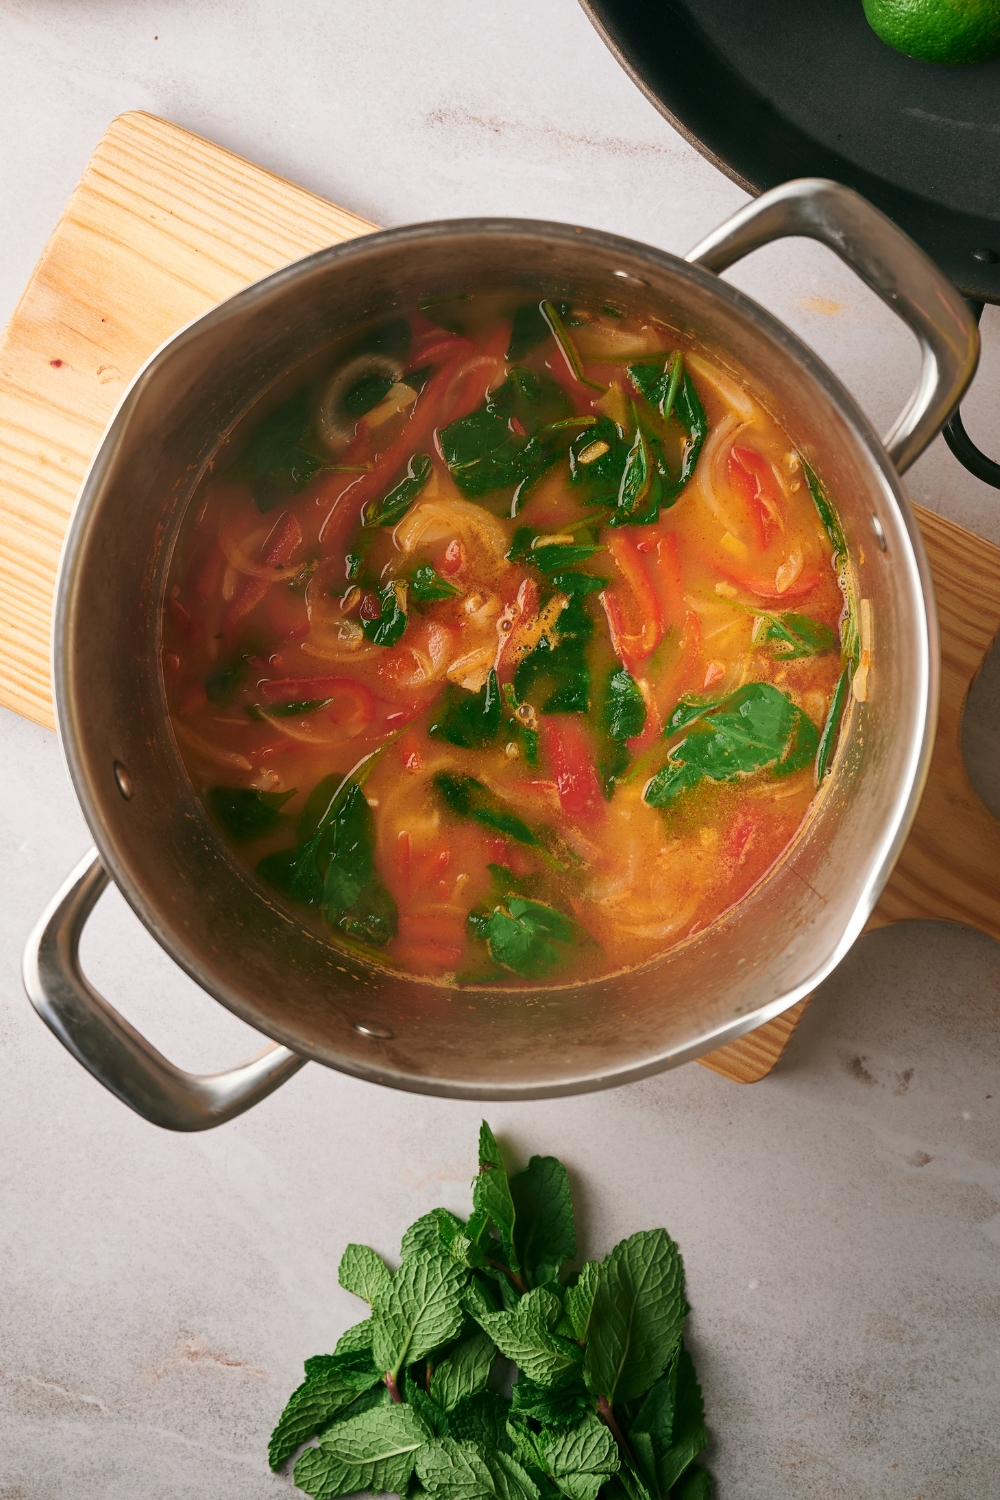 Wilted spinach, sliced red bell peppers, and onions in broth in a pot.